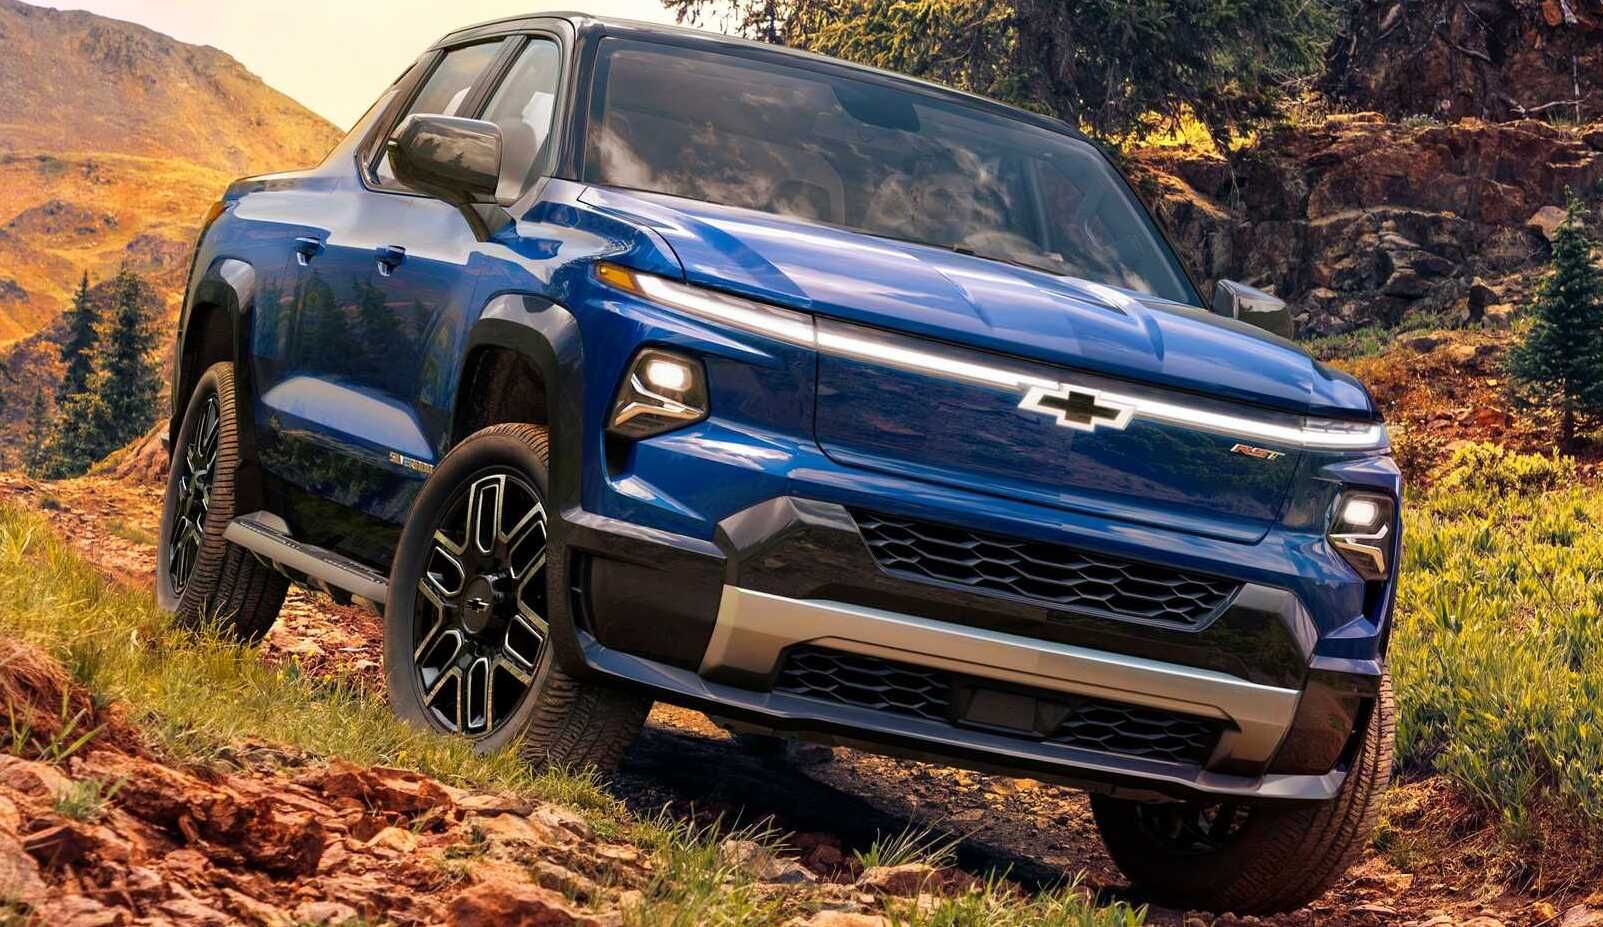 Chevy's Electric Silverado RST First Edition Sold Out In 12 Minutes Proving That EV Pickups Are In Demand